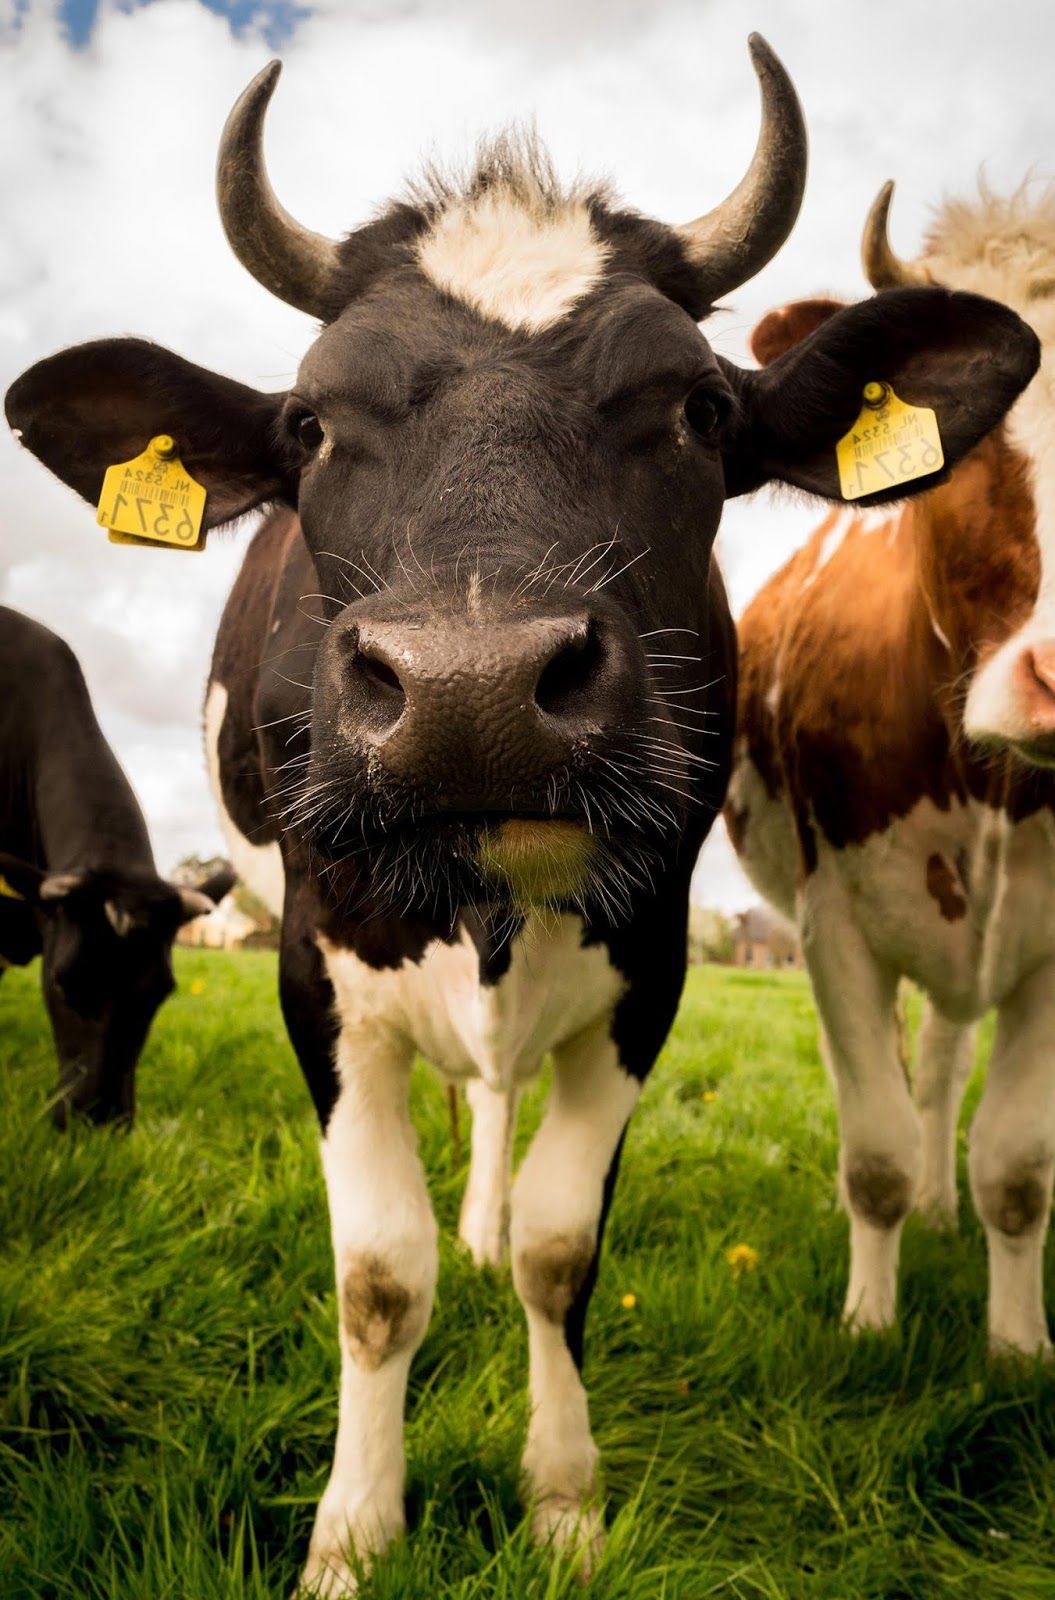 Aggregate more than 53 cow iphone wallpaper best  incdgdbentre